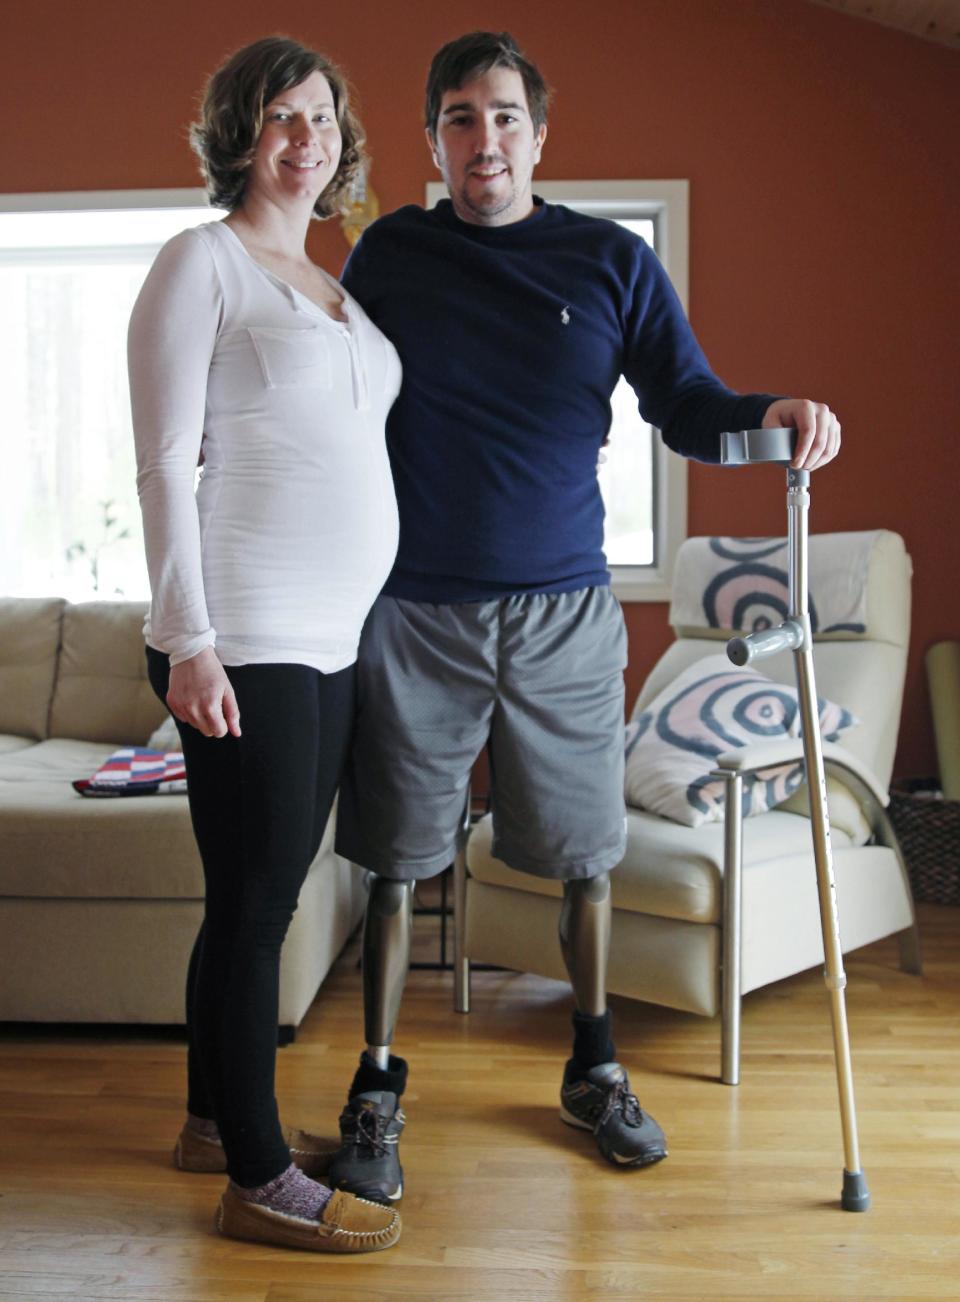 Jeff Bauman, who lost both legs in the Boston Marathon bombings, then helped authorities identify the suspects, poses with his expectant fiancé, Erin Hurley, their home in Carlisle, Mass., Friday, March 14, 2014. According to Bauman, the baby is due July 14. They don’t know if it’s a boy or a girl, and they want it to be a surprise. The two were engaged in February. (AP Photo/Charles Krupa)